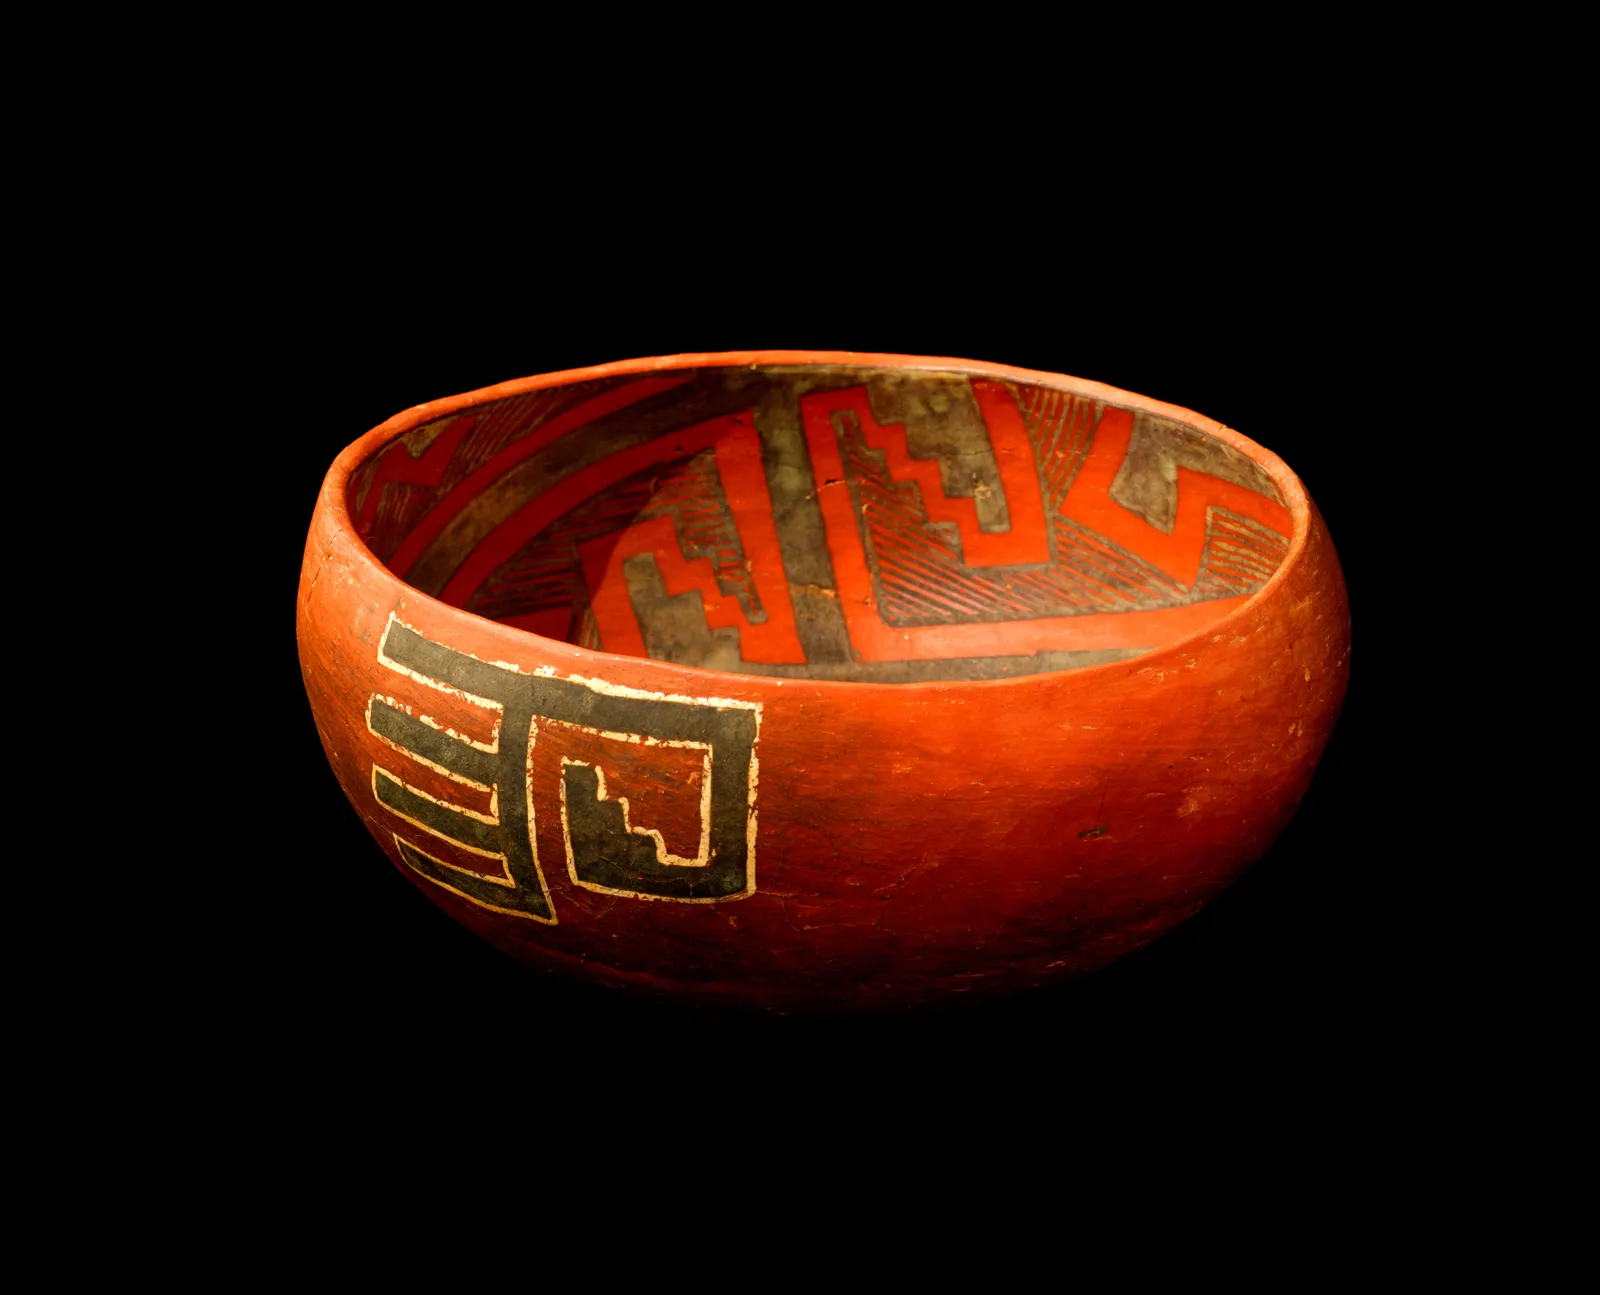  A red ceramic bowl with black geometric designs, a historical artifact of royal heritage.